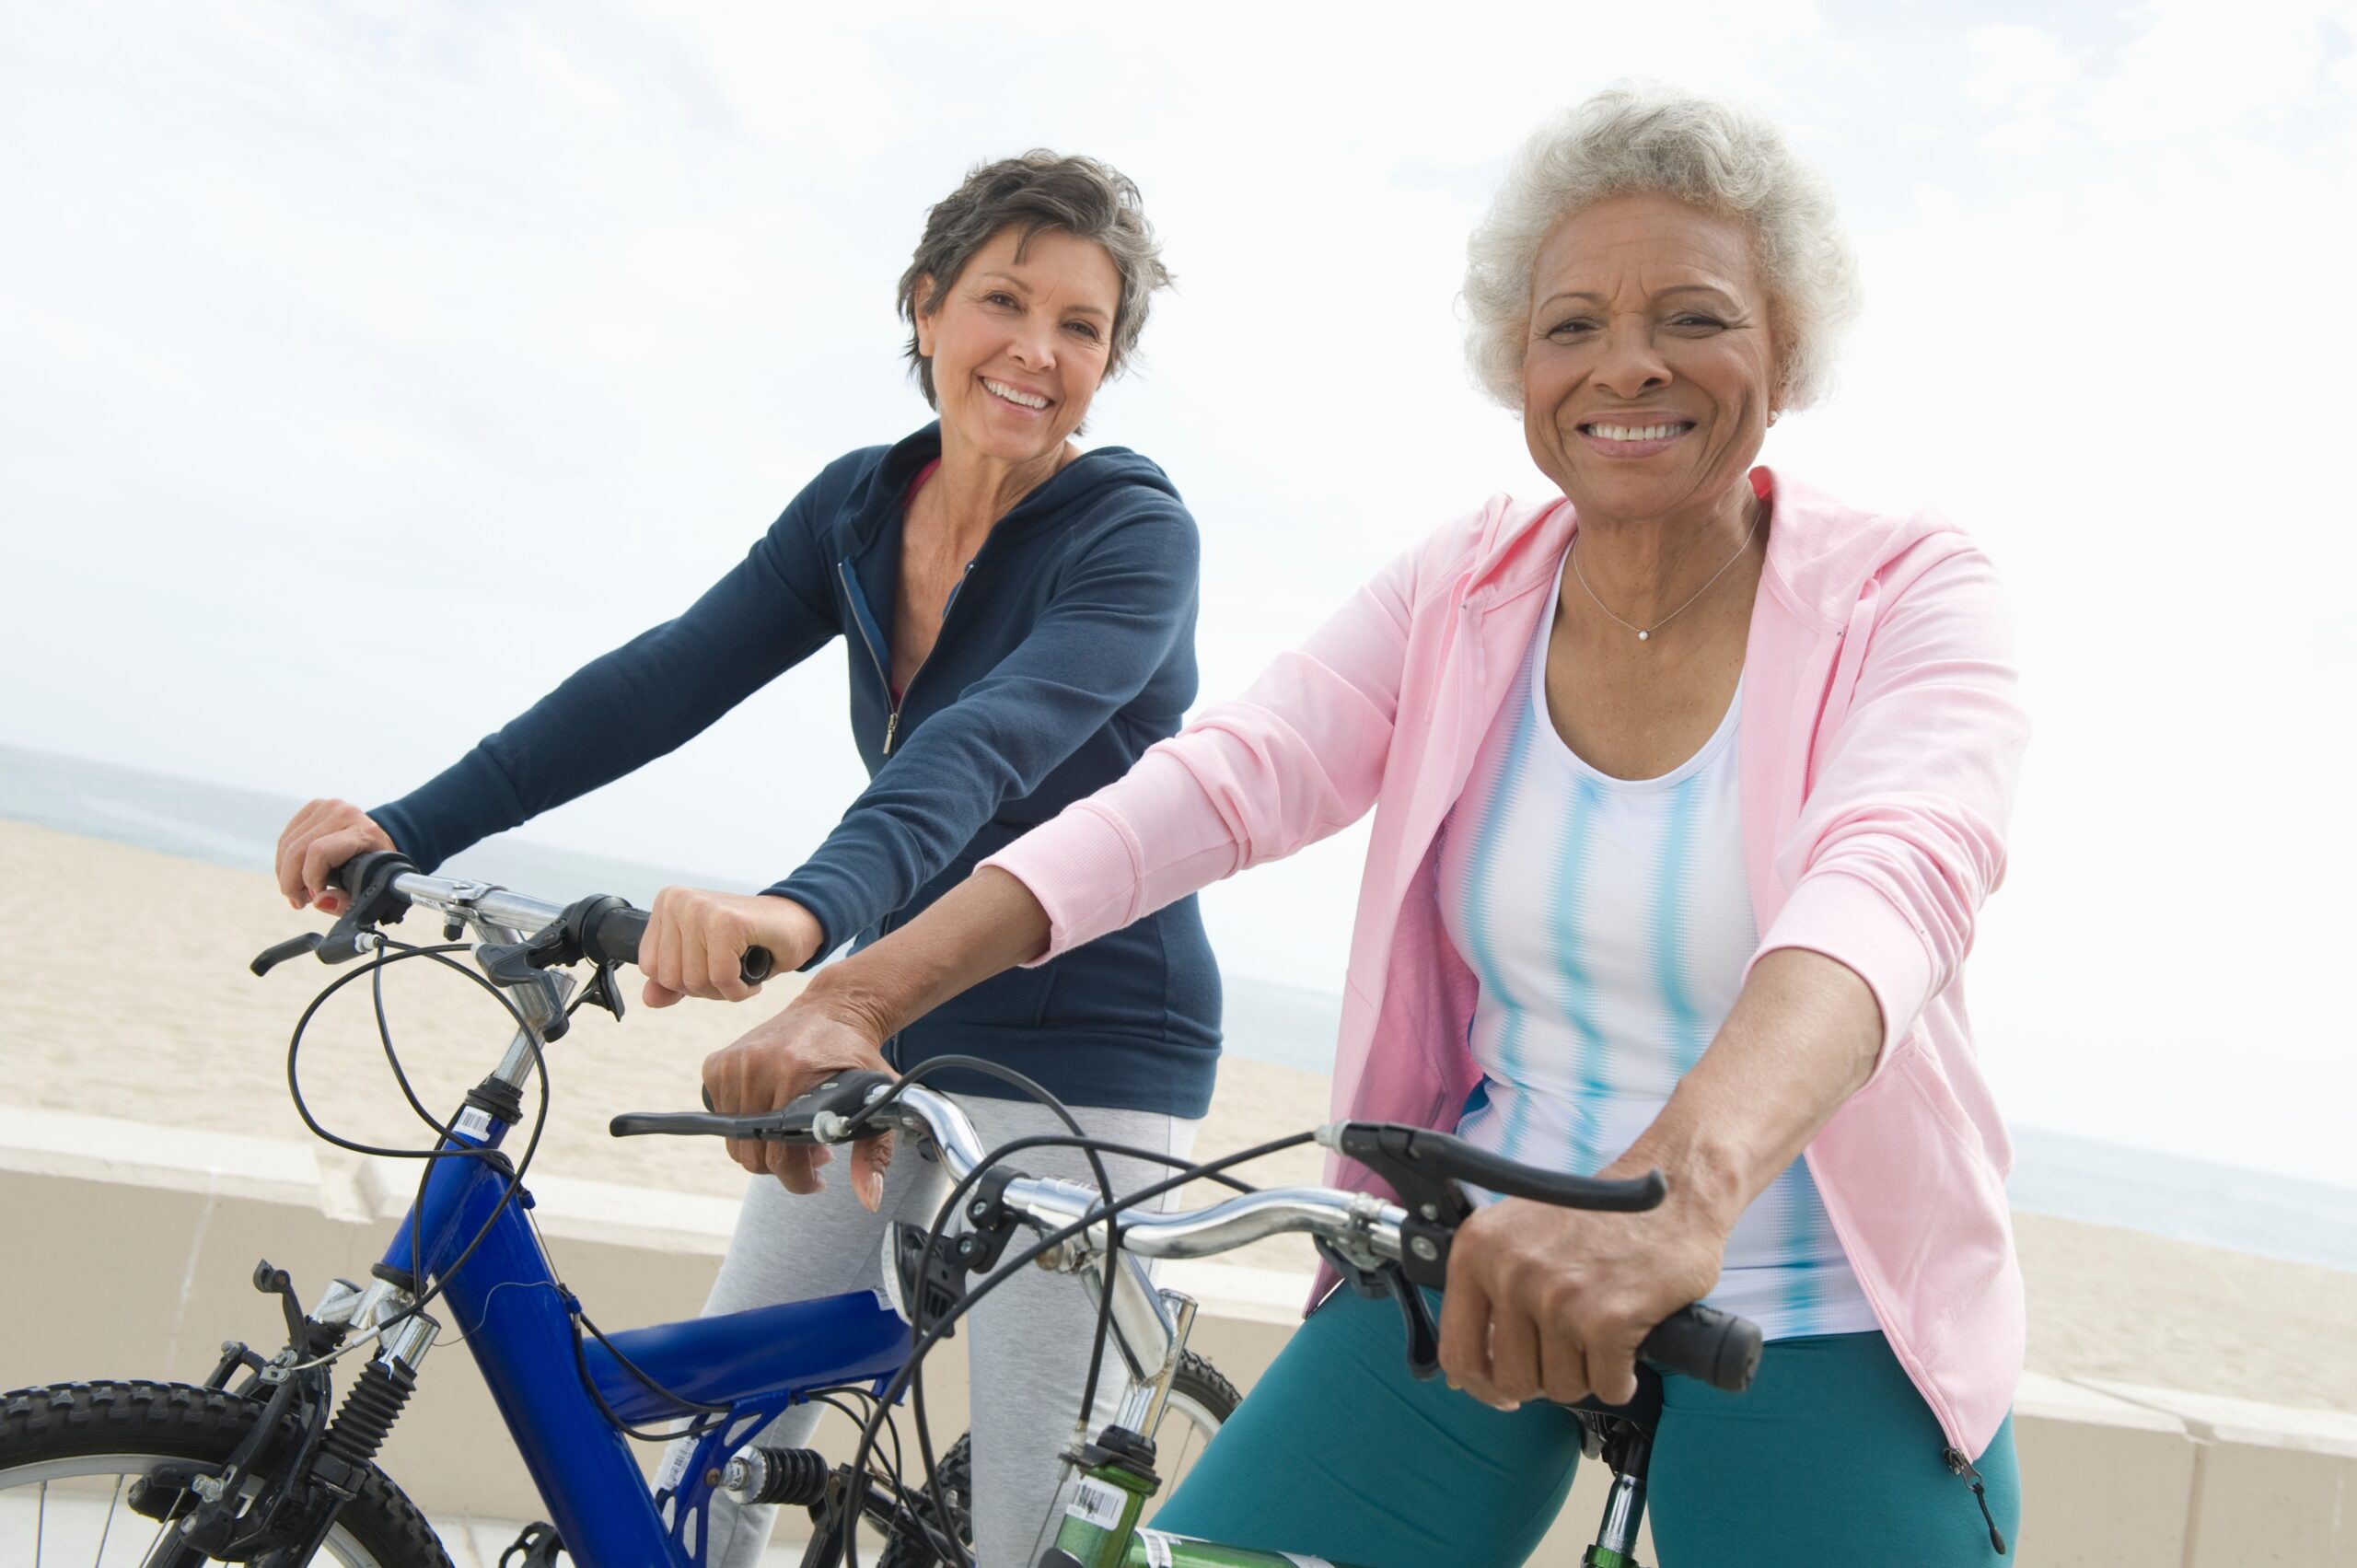 Two active senior women with bright smiles enjoying a bike ride by the beach, living life to the fullest without pain.